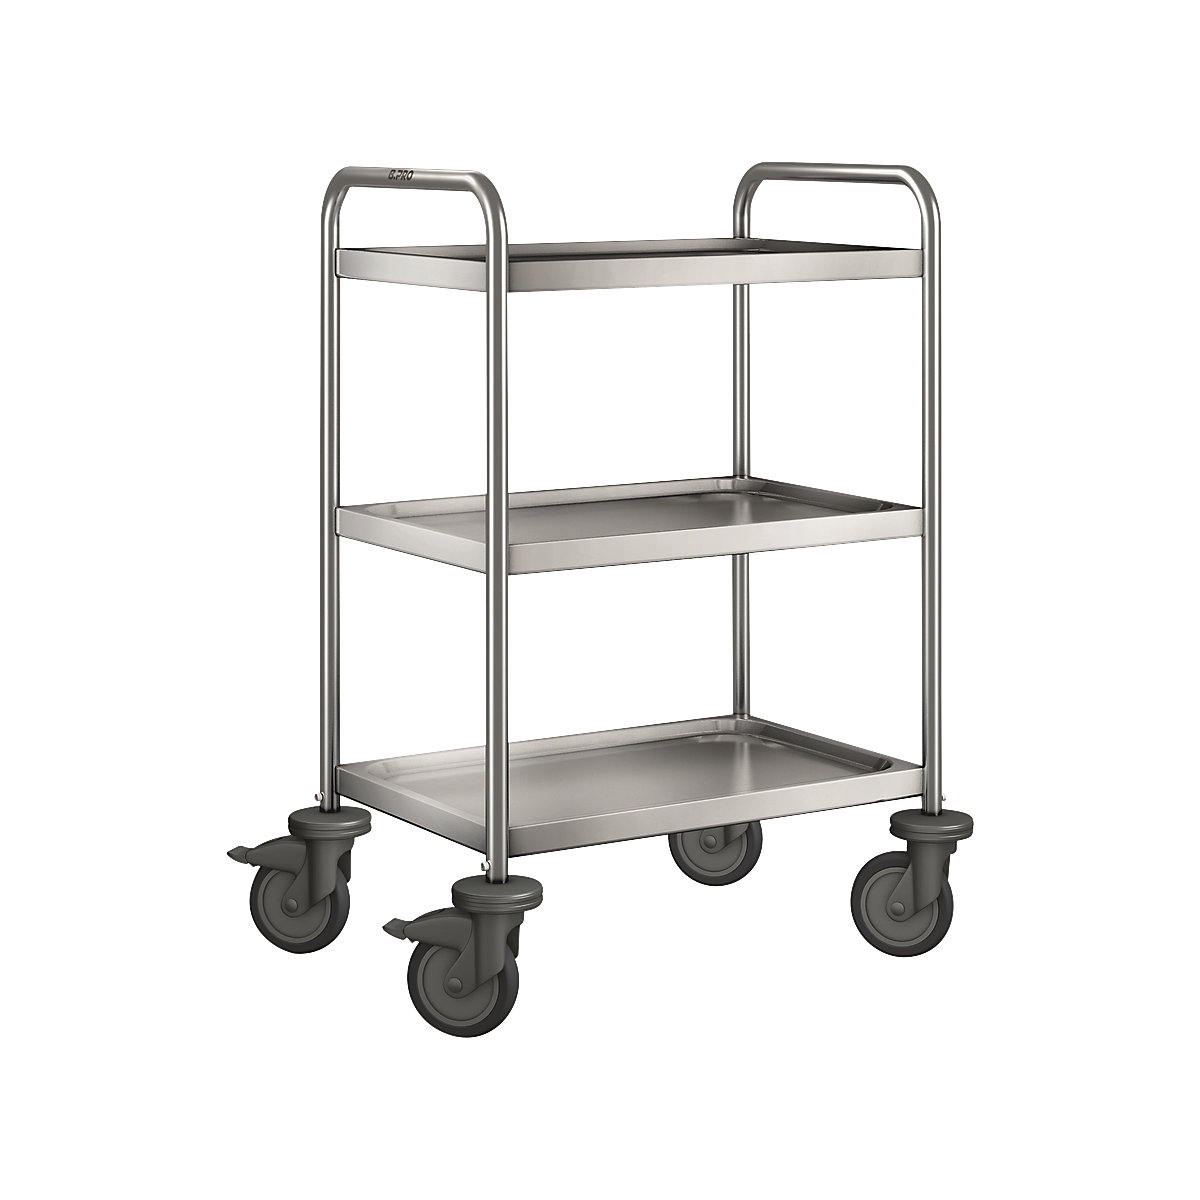 BLANCO stainless steel serving trolley – B.PRO